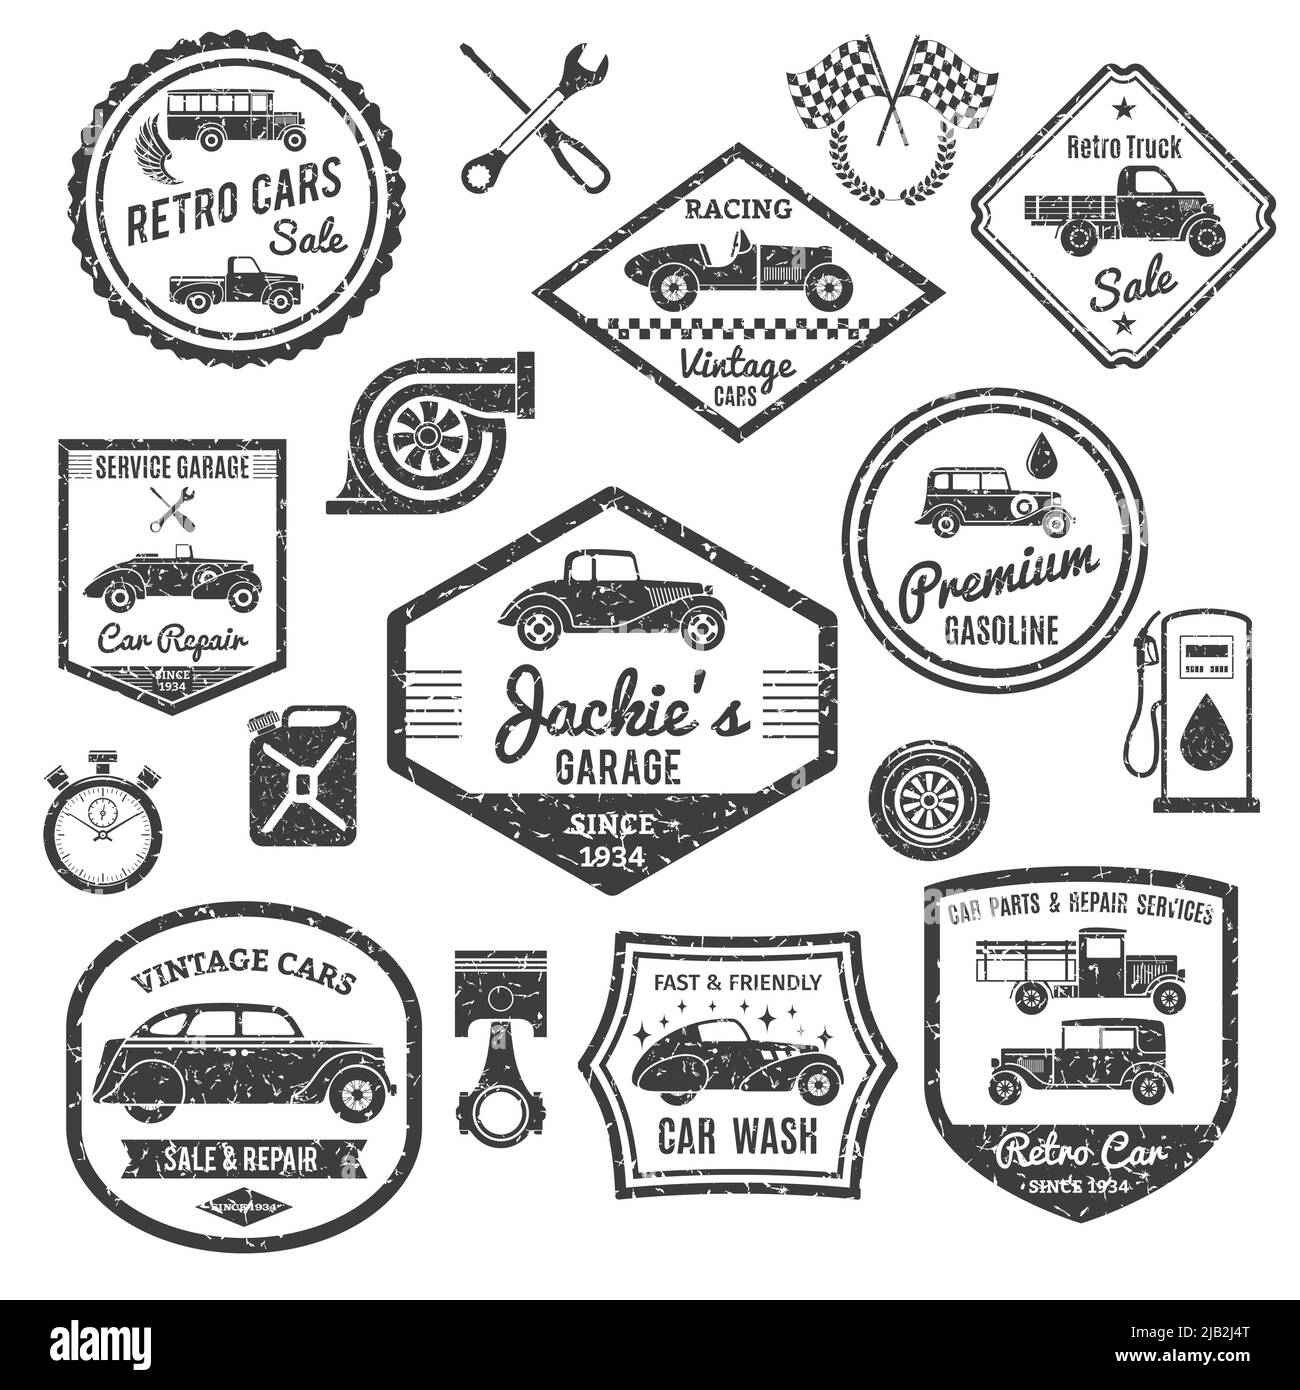 Retro car labels and stickers black set isolated vector illustration Stock Vector